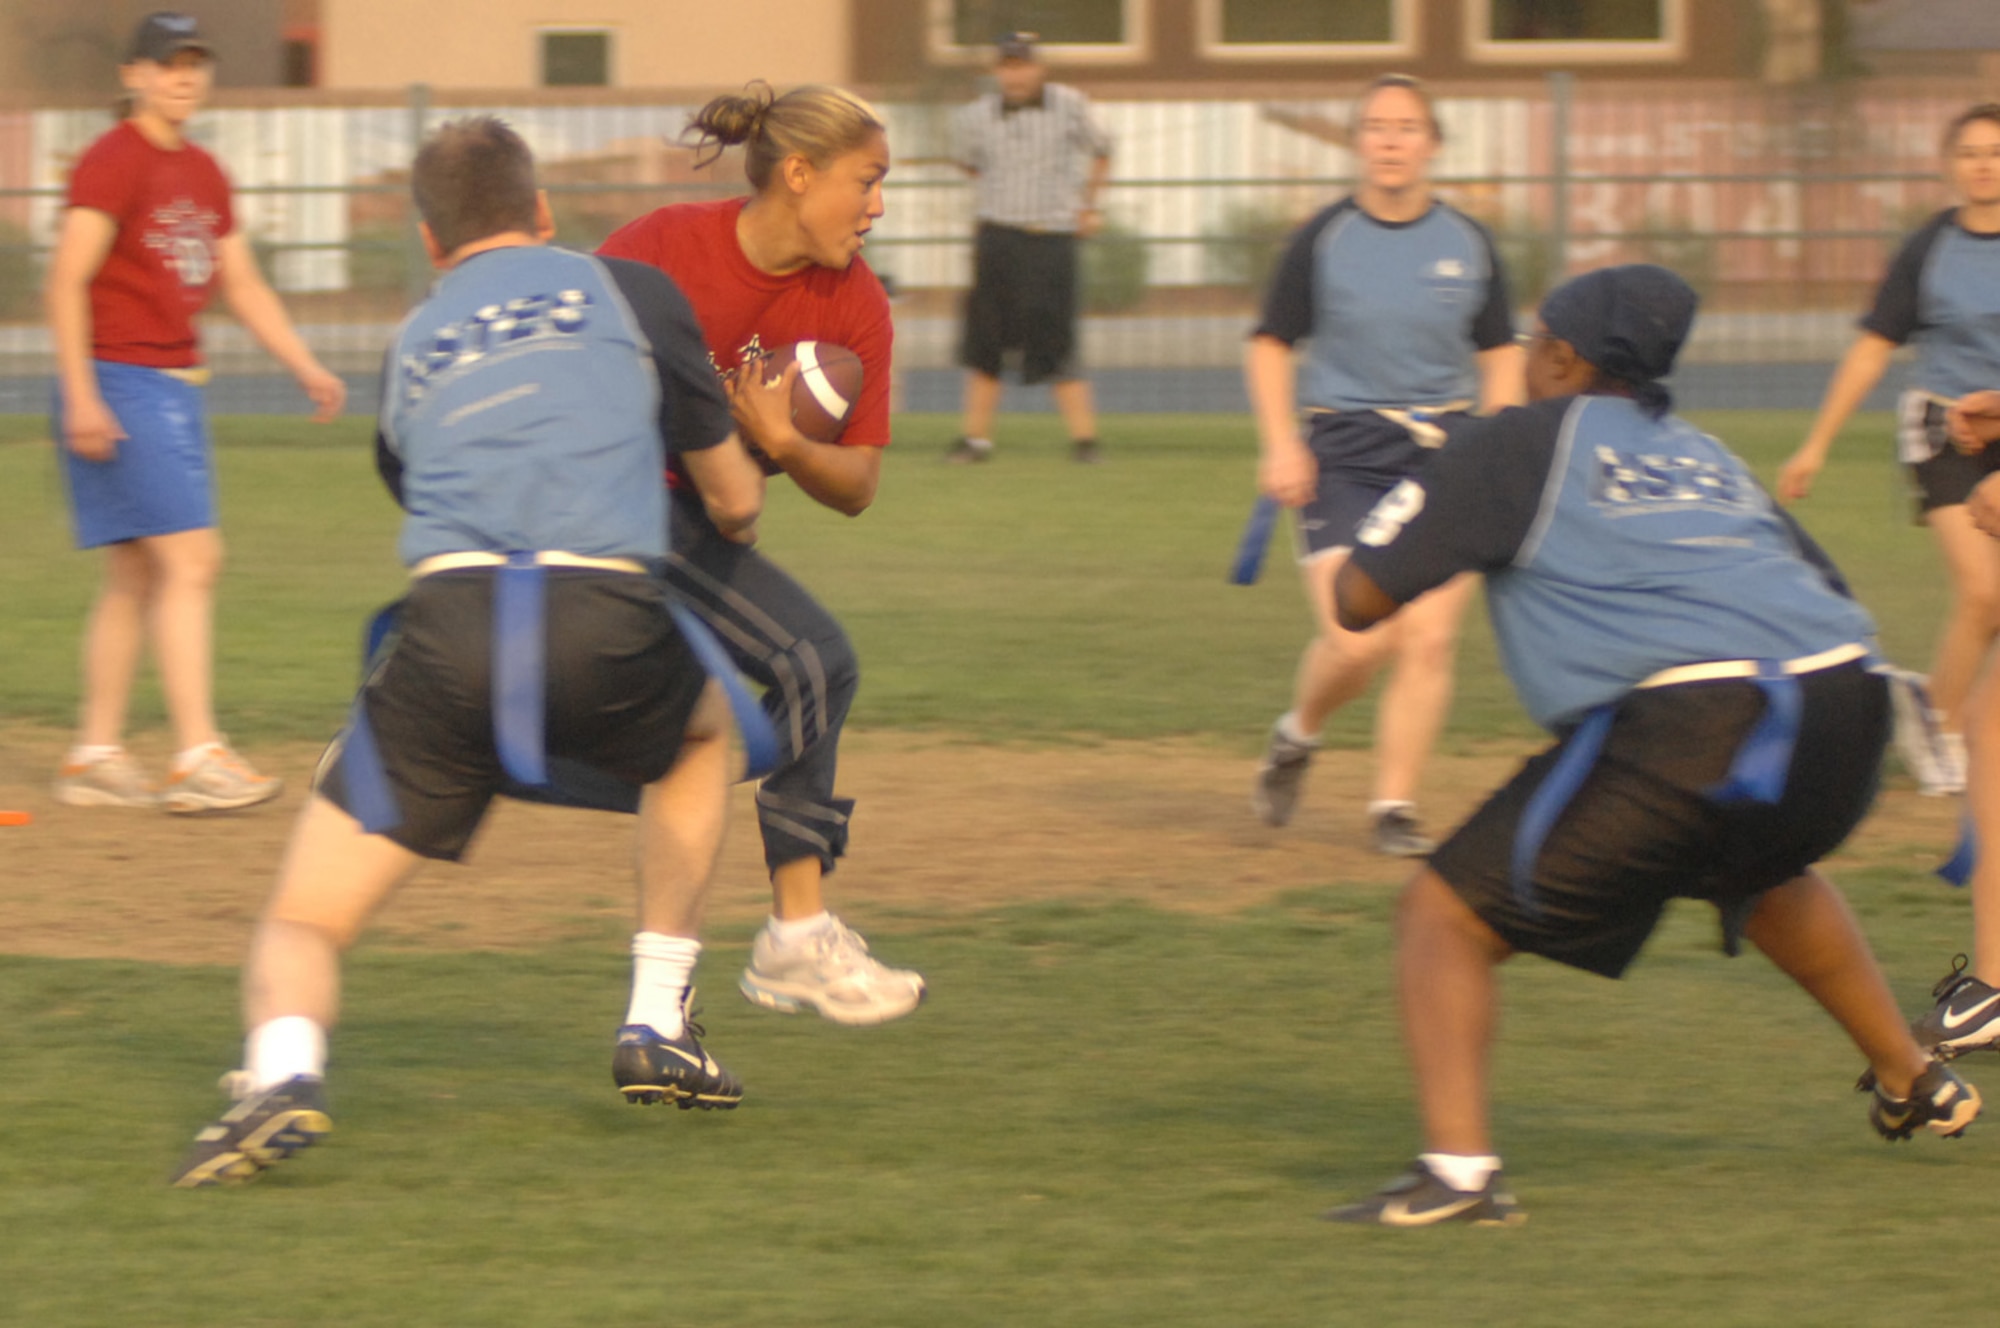 Ashlee Huver rushes the ball for positive yards against the National Security Tech Team (NST). Nellis went on to beat NST 26-0 and took 2nd place in the event. (U.S. Air Force Photo/Senior Airman Jason Huddleston)